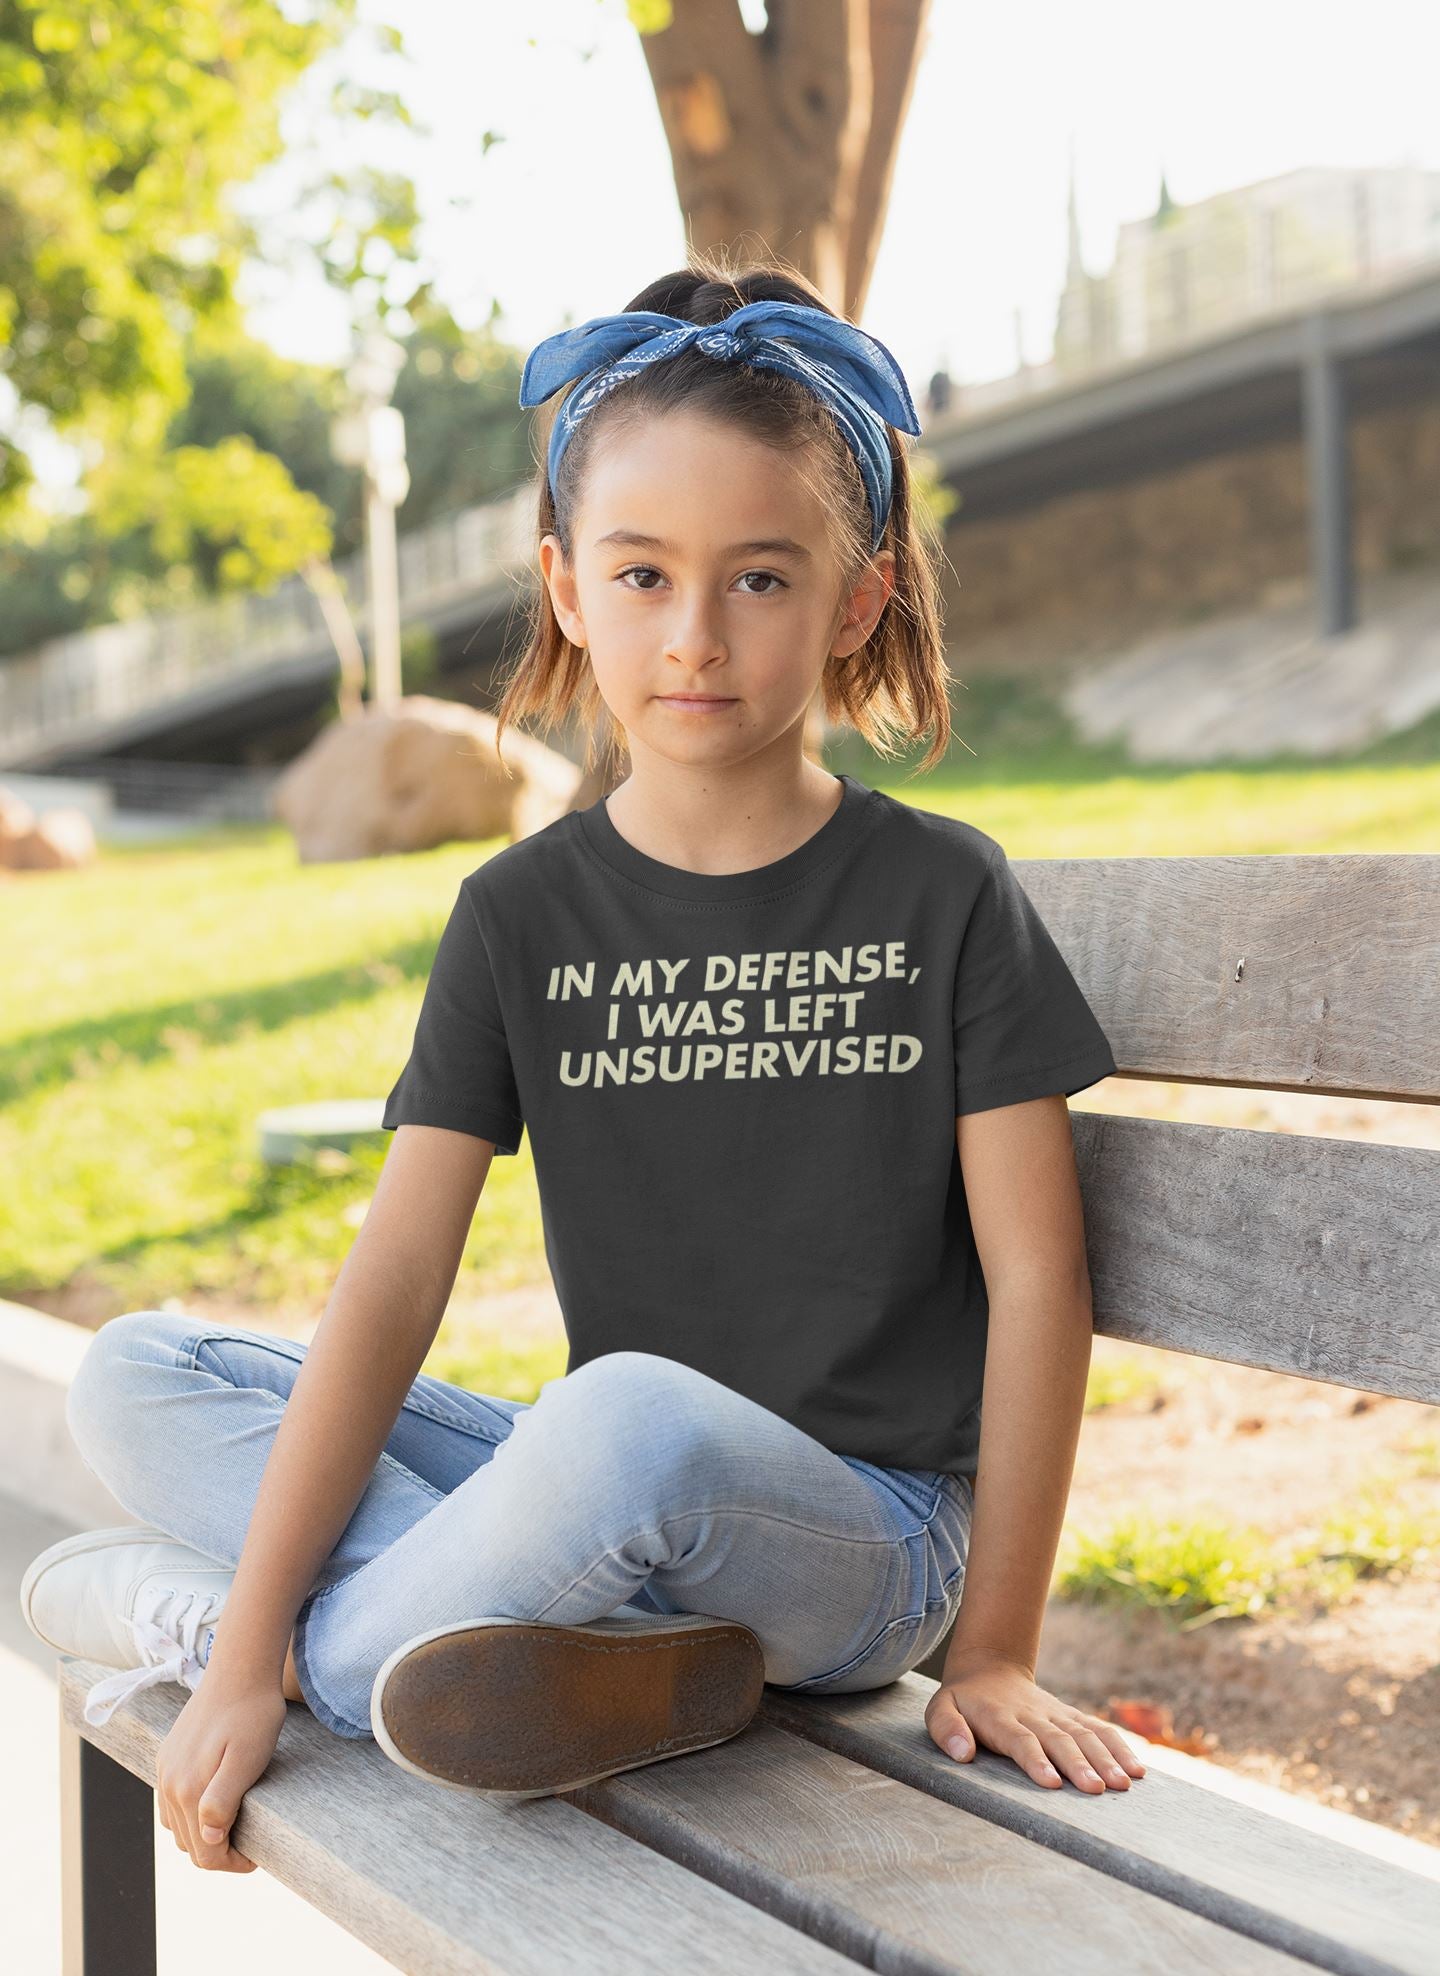 In My Defense I was Left Unsupervised Funny T Shirt for Baby Boy and Girl freeshipping - Catch My Drift India